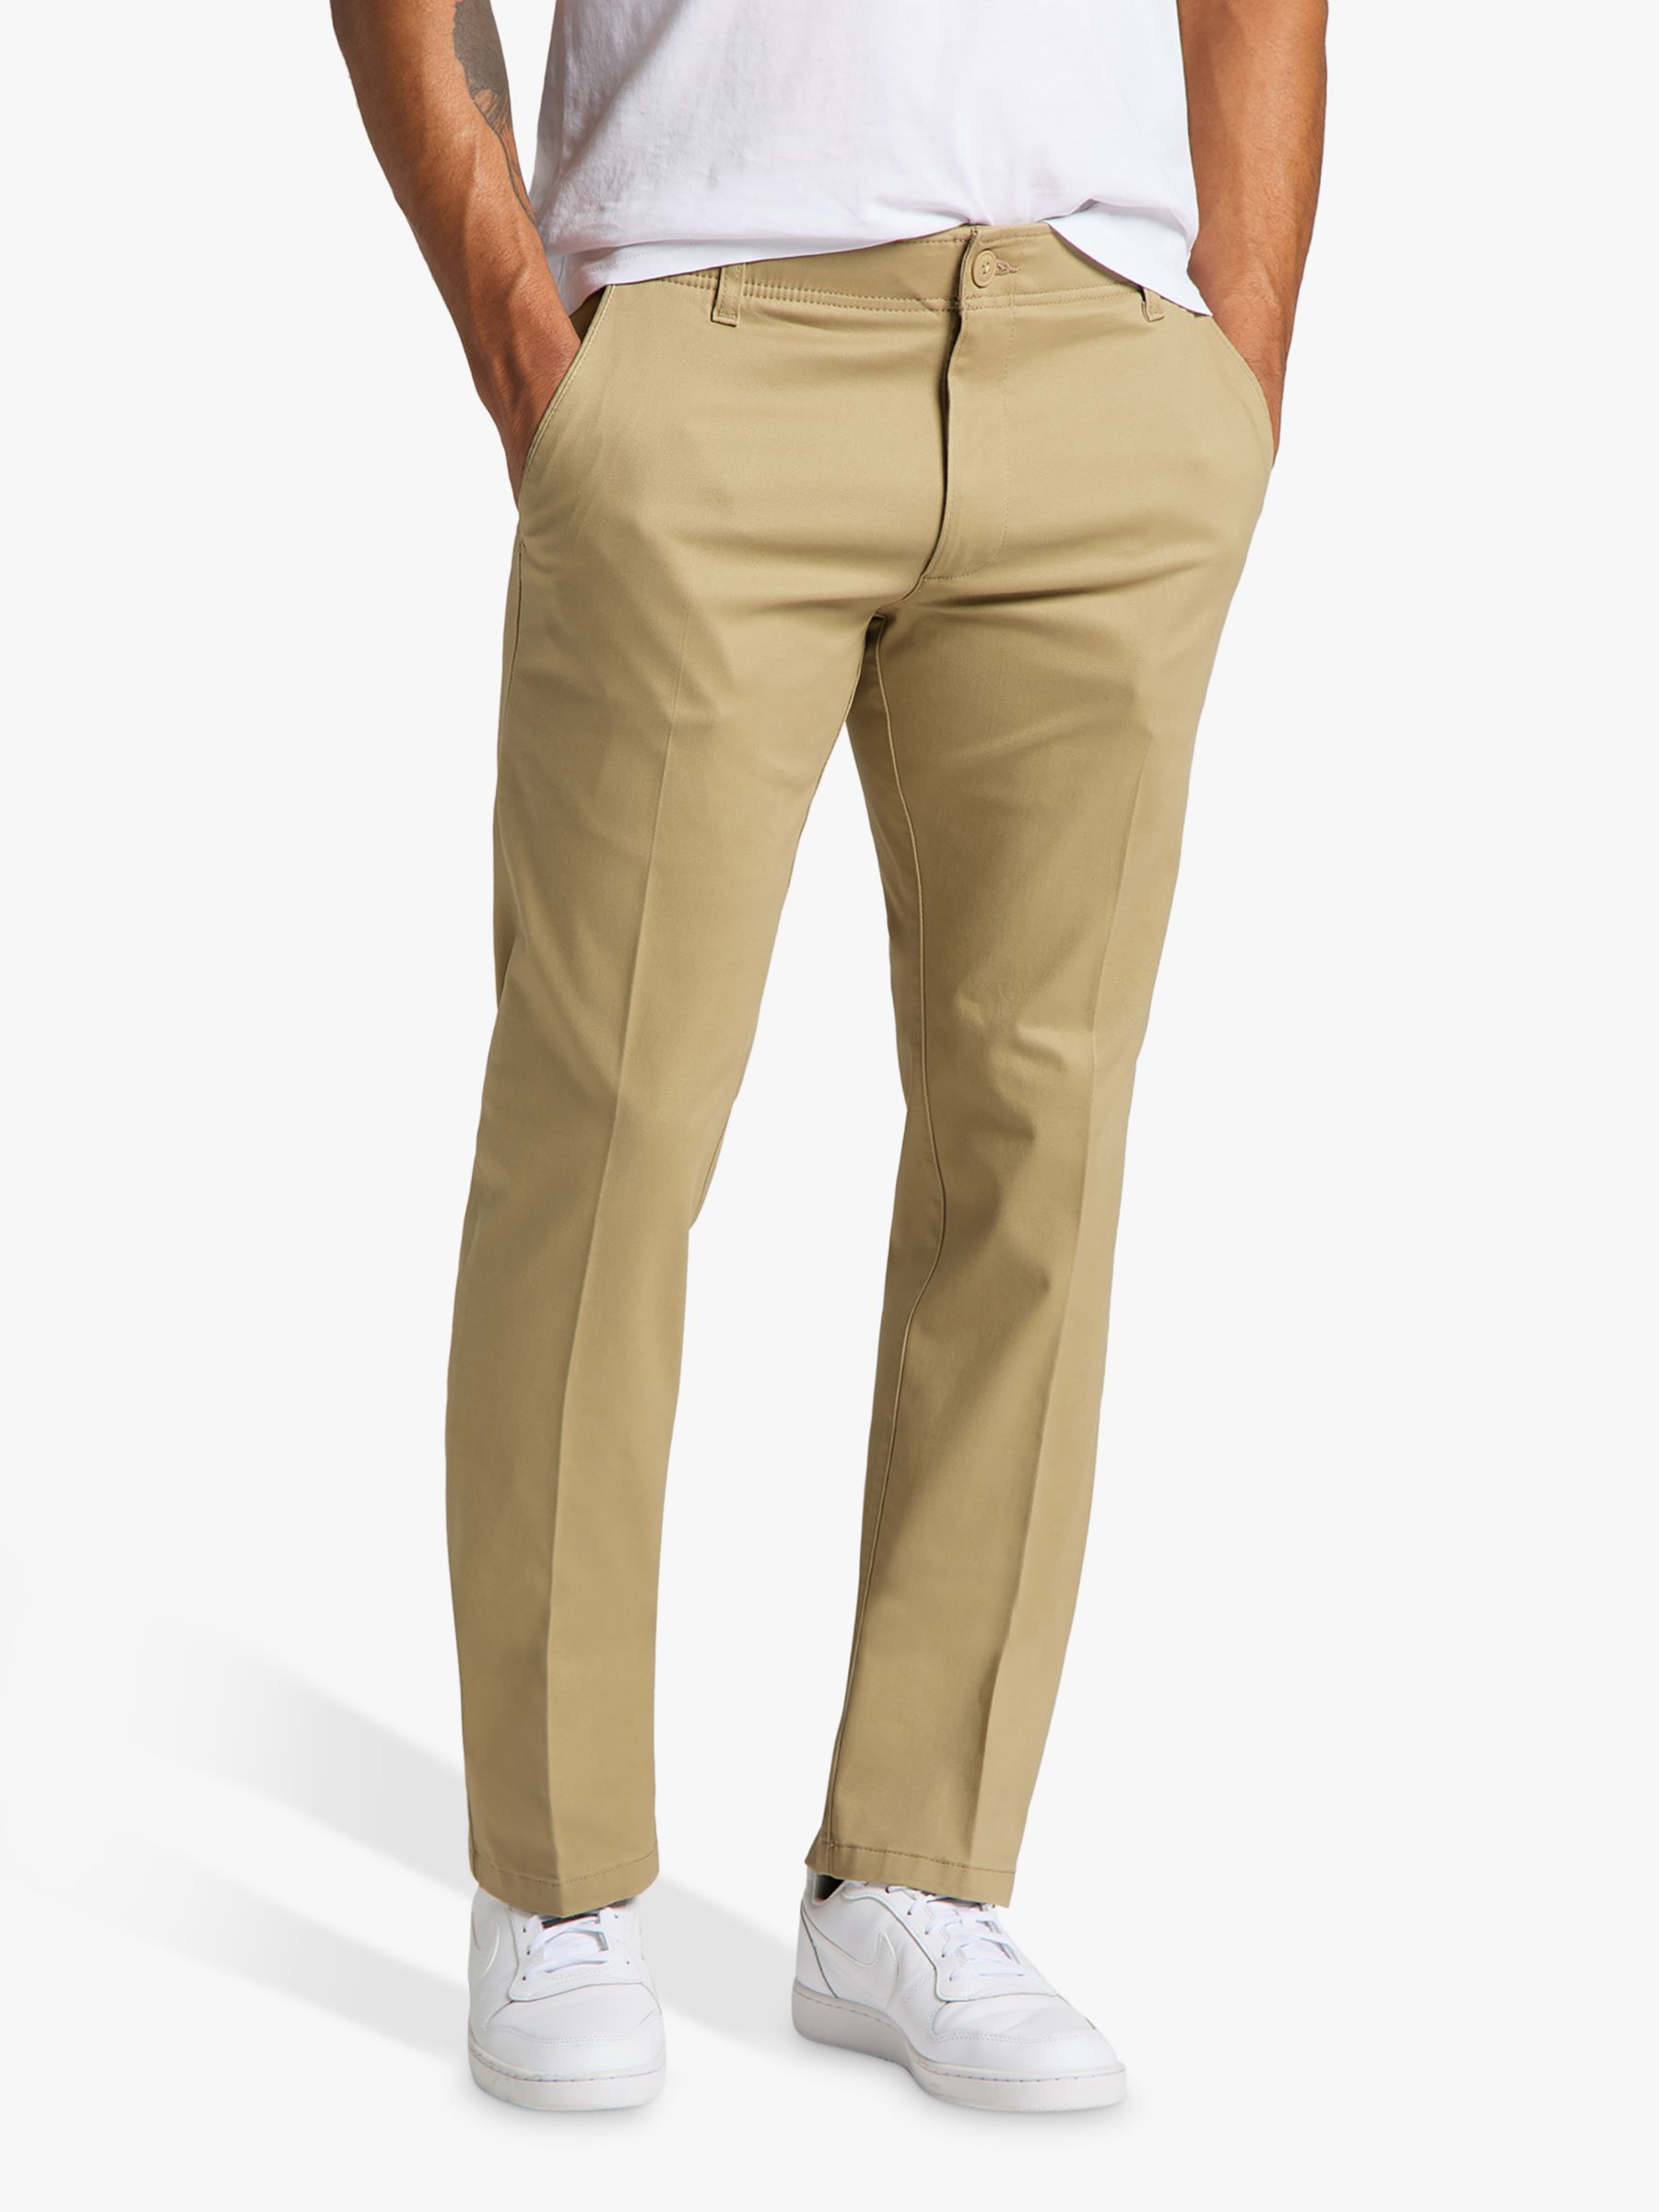 Lee Cotton Blend Chinos